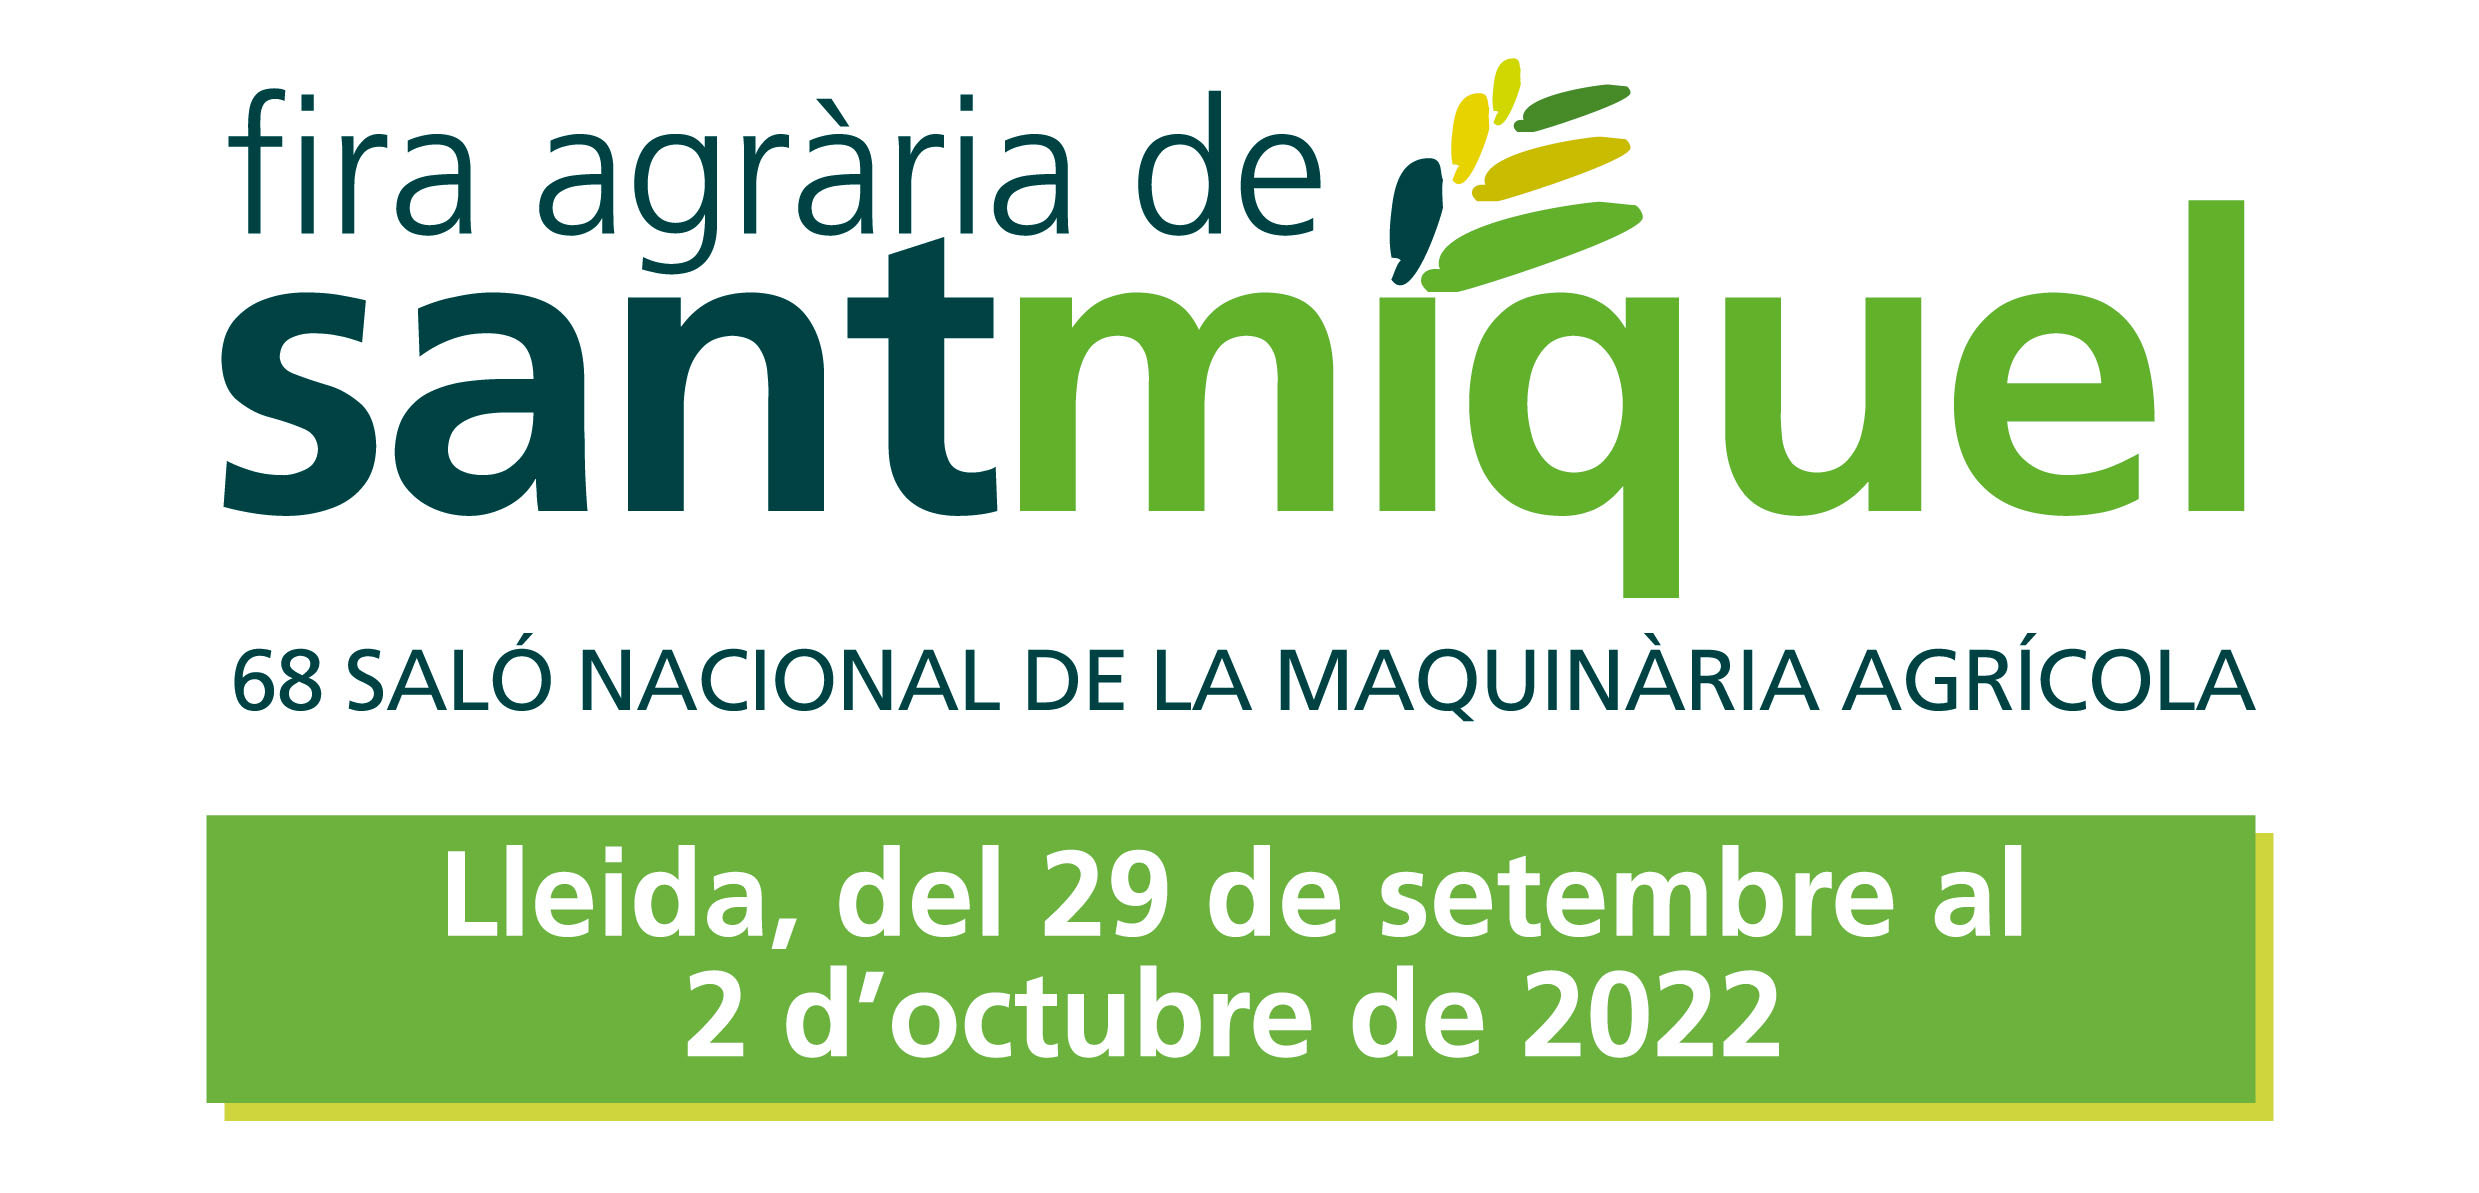 SEE YOU AT THE SANT MIQUEL AGRICULTURAL FAIR!